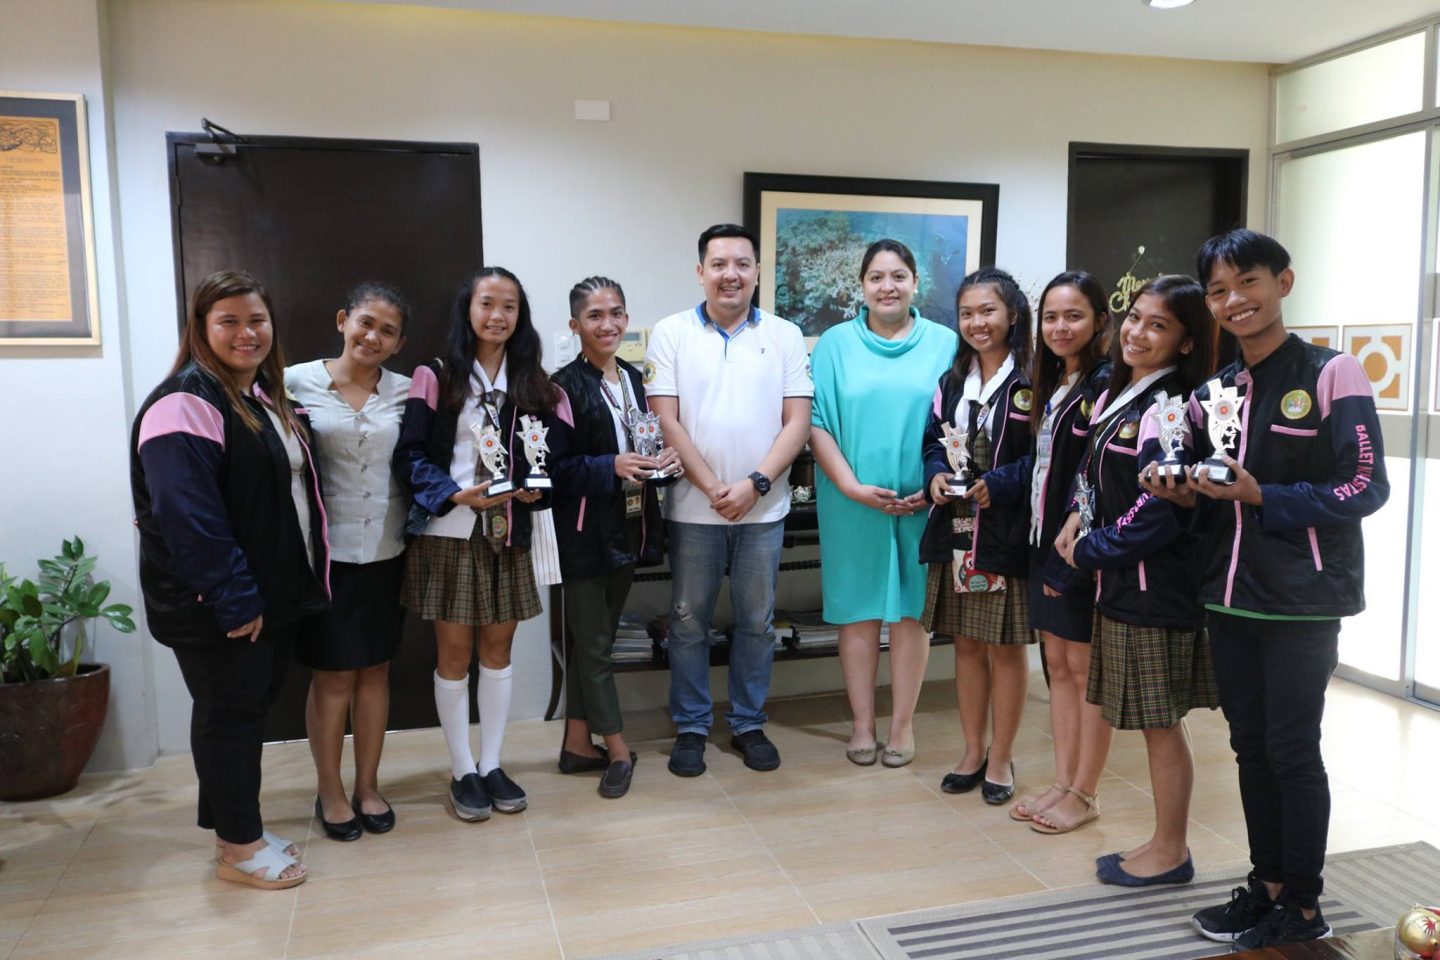 Mayor of Bogo, Carlo Martinez with the Vice Mayor of Bogo, Mayel Martinez with the City of Bogo Science and Arts students.